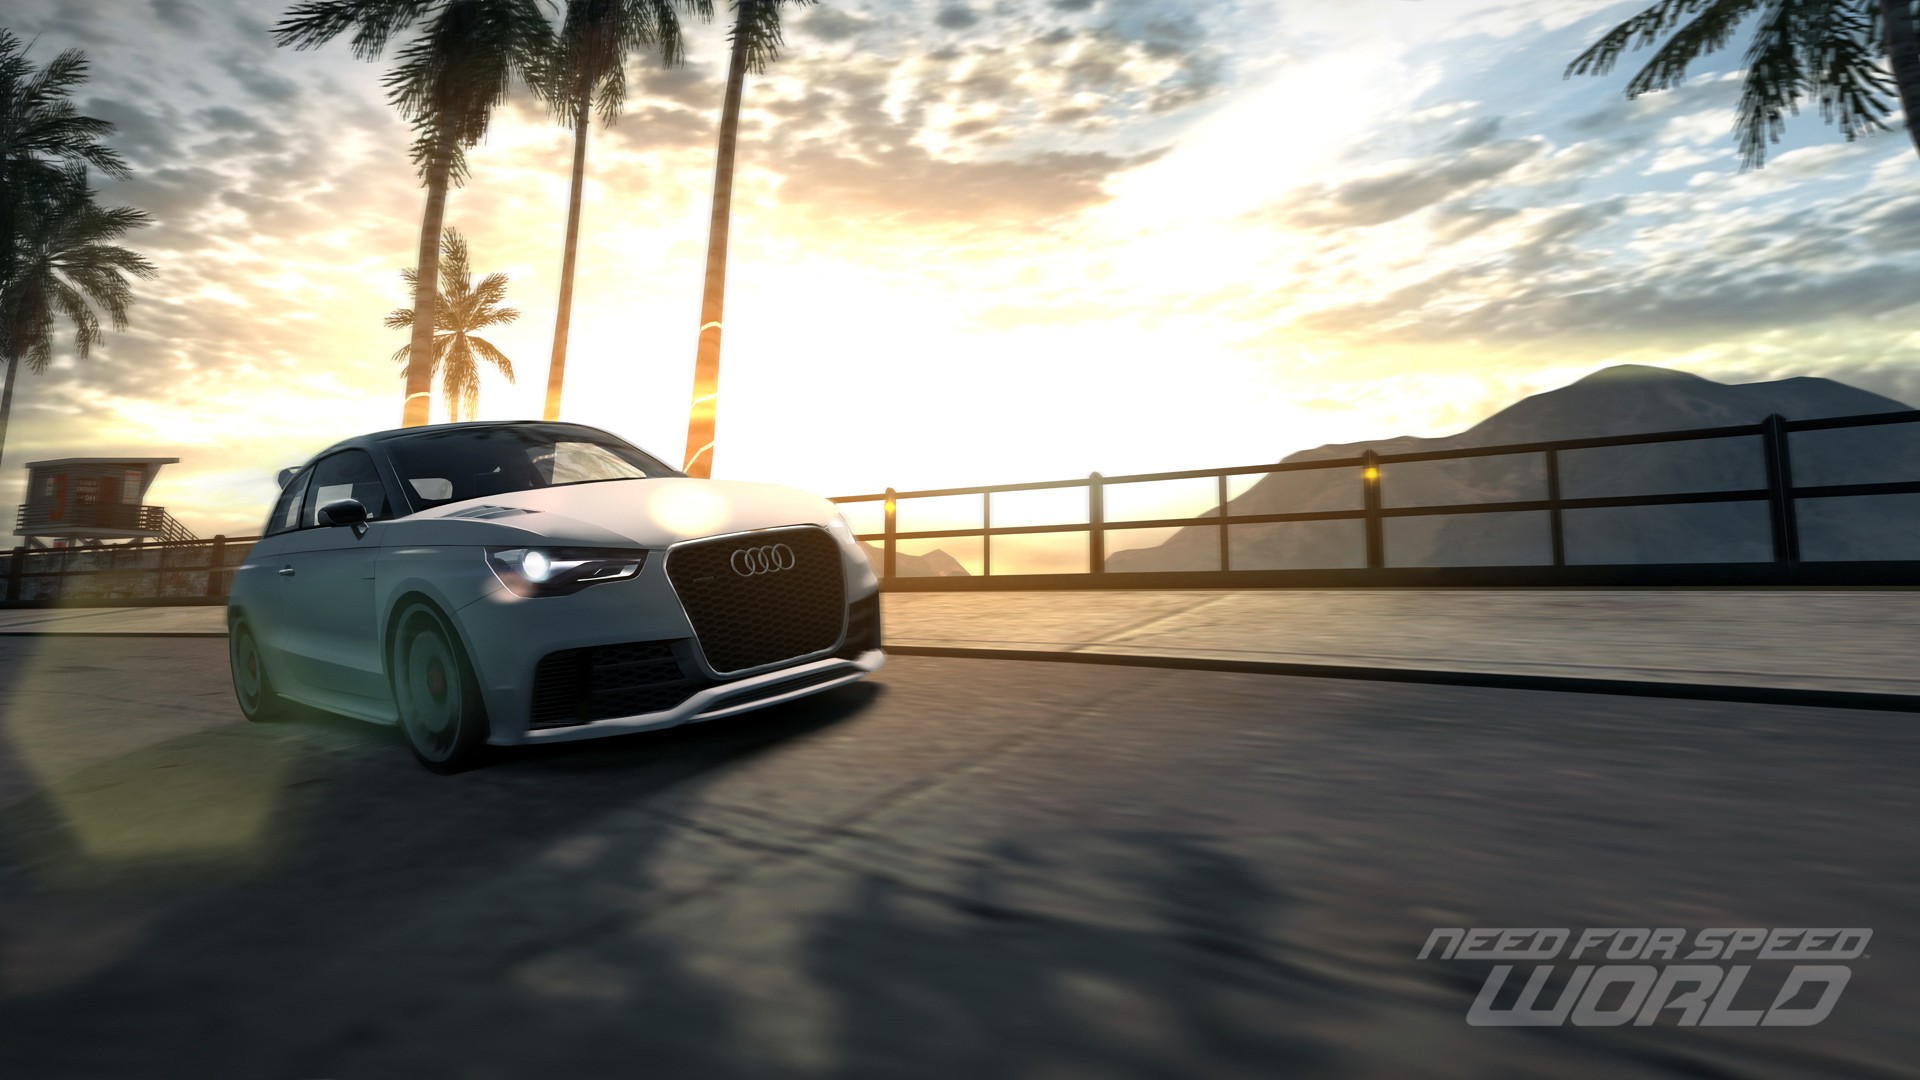 video, Games, Cars, Audi, A1, Audi, A1, Clubsport, Quattro, Need, For, Speed, World, Games, Pc, Games Wallpaper